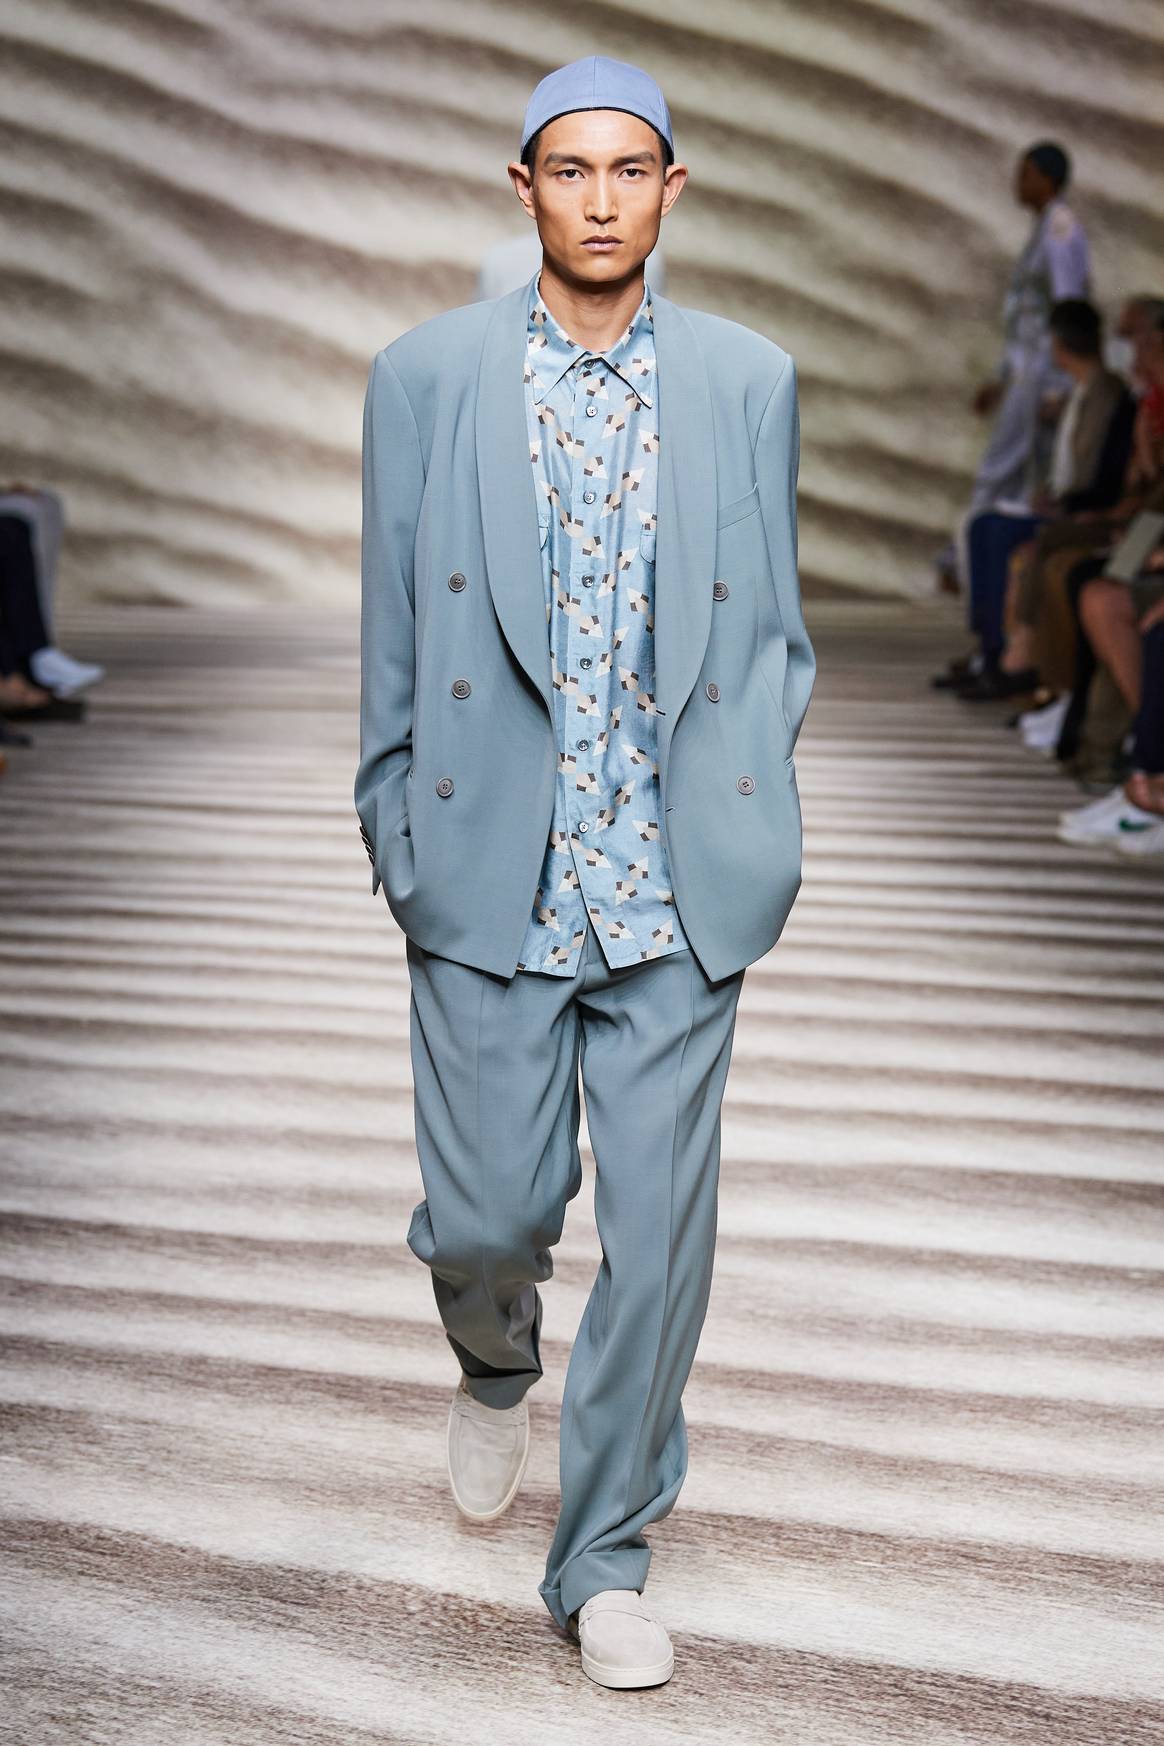 Men's Fashion: 22 top trends for Spring/Summer 2019